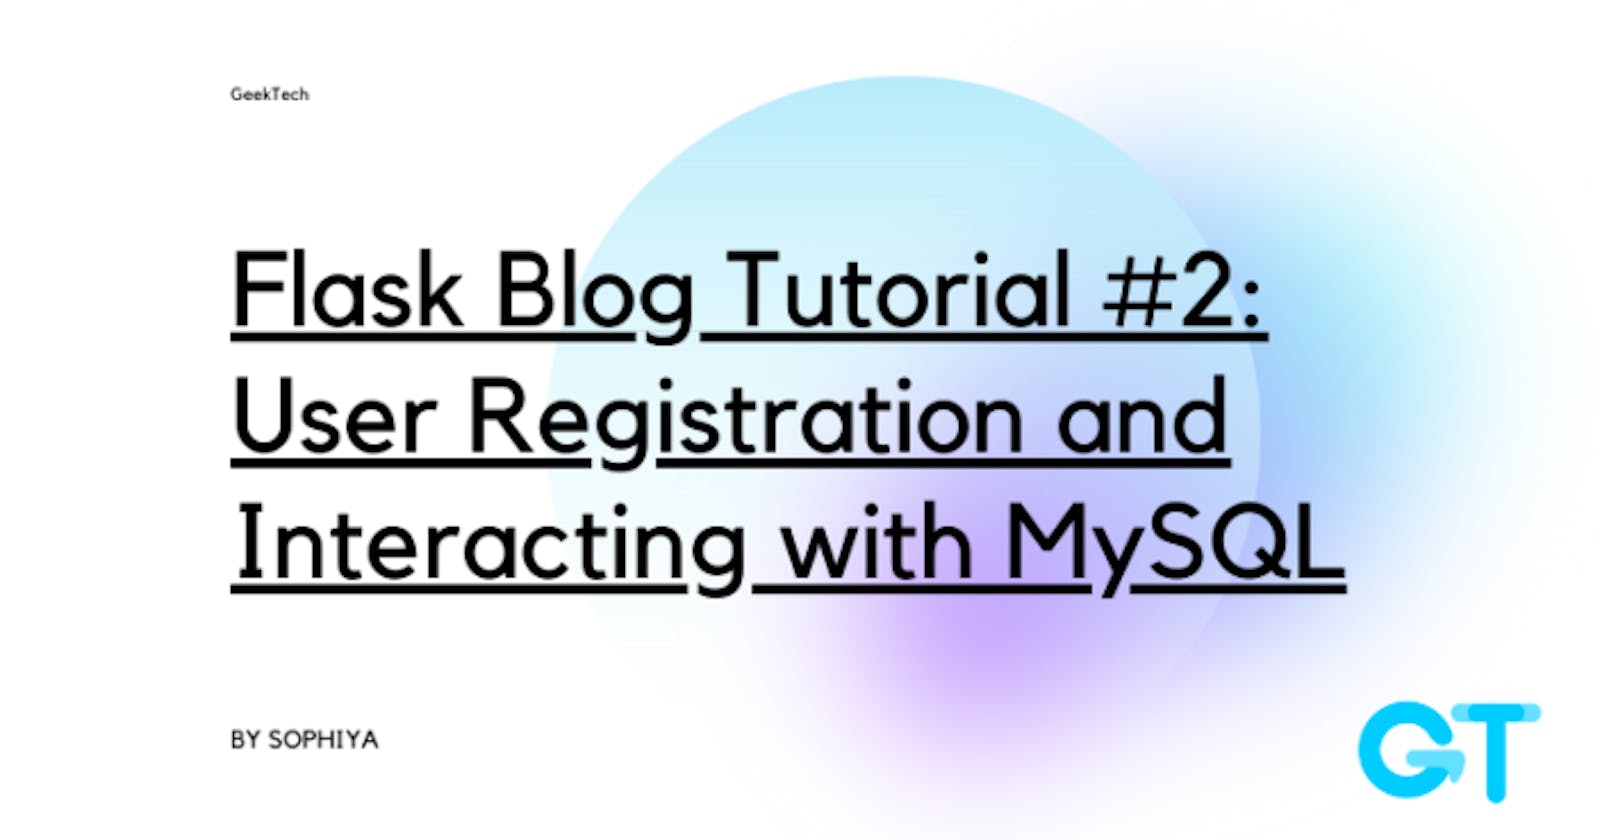 Flask Blog Tutorial #2: User Registration and Interacting with MySQL